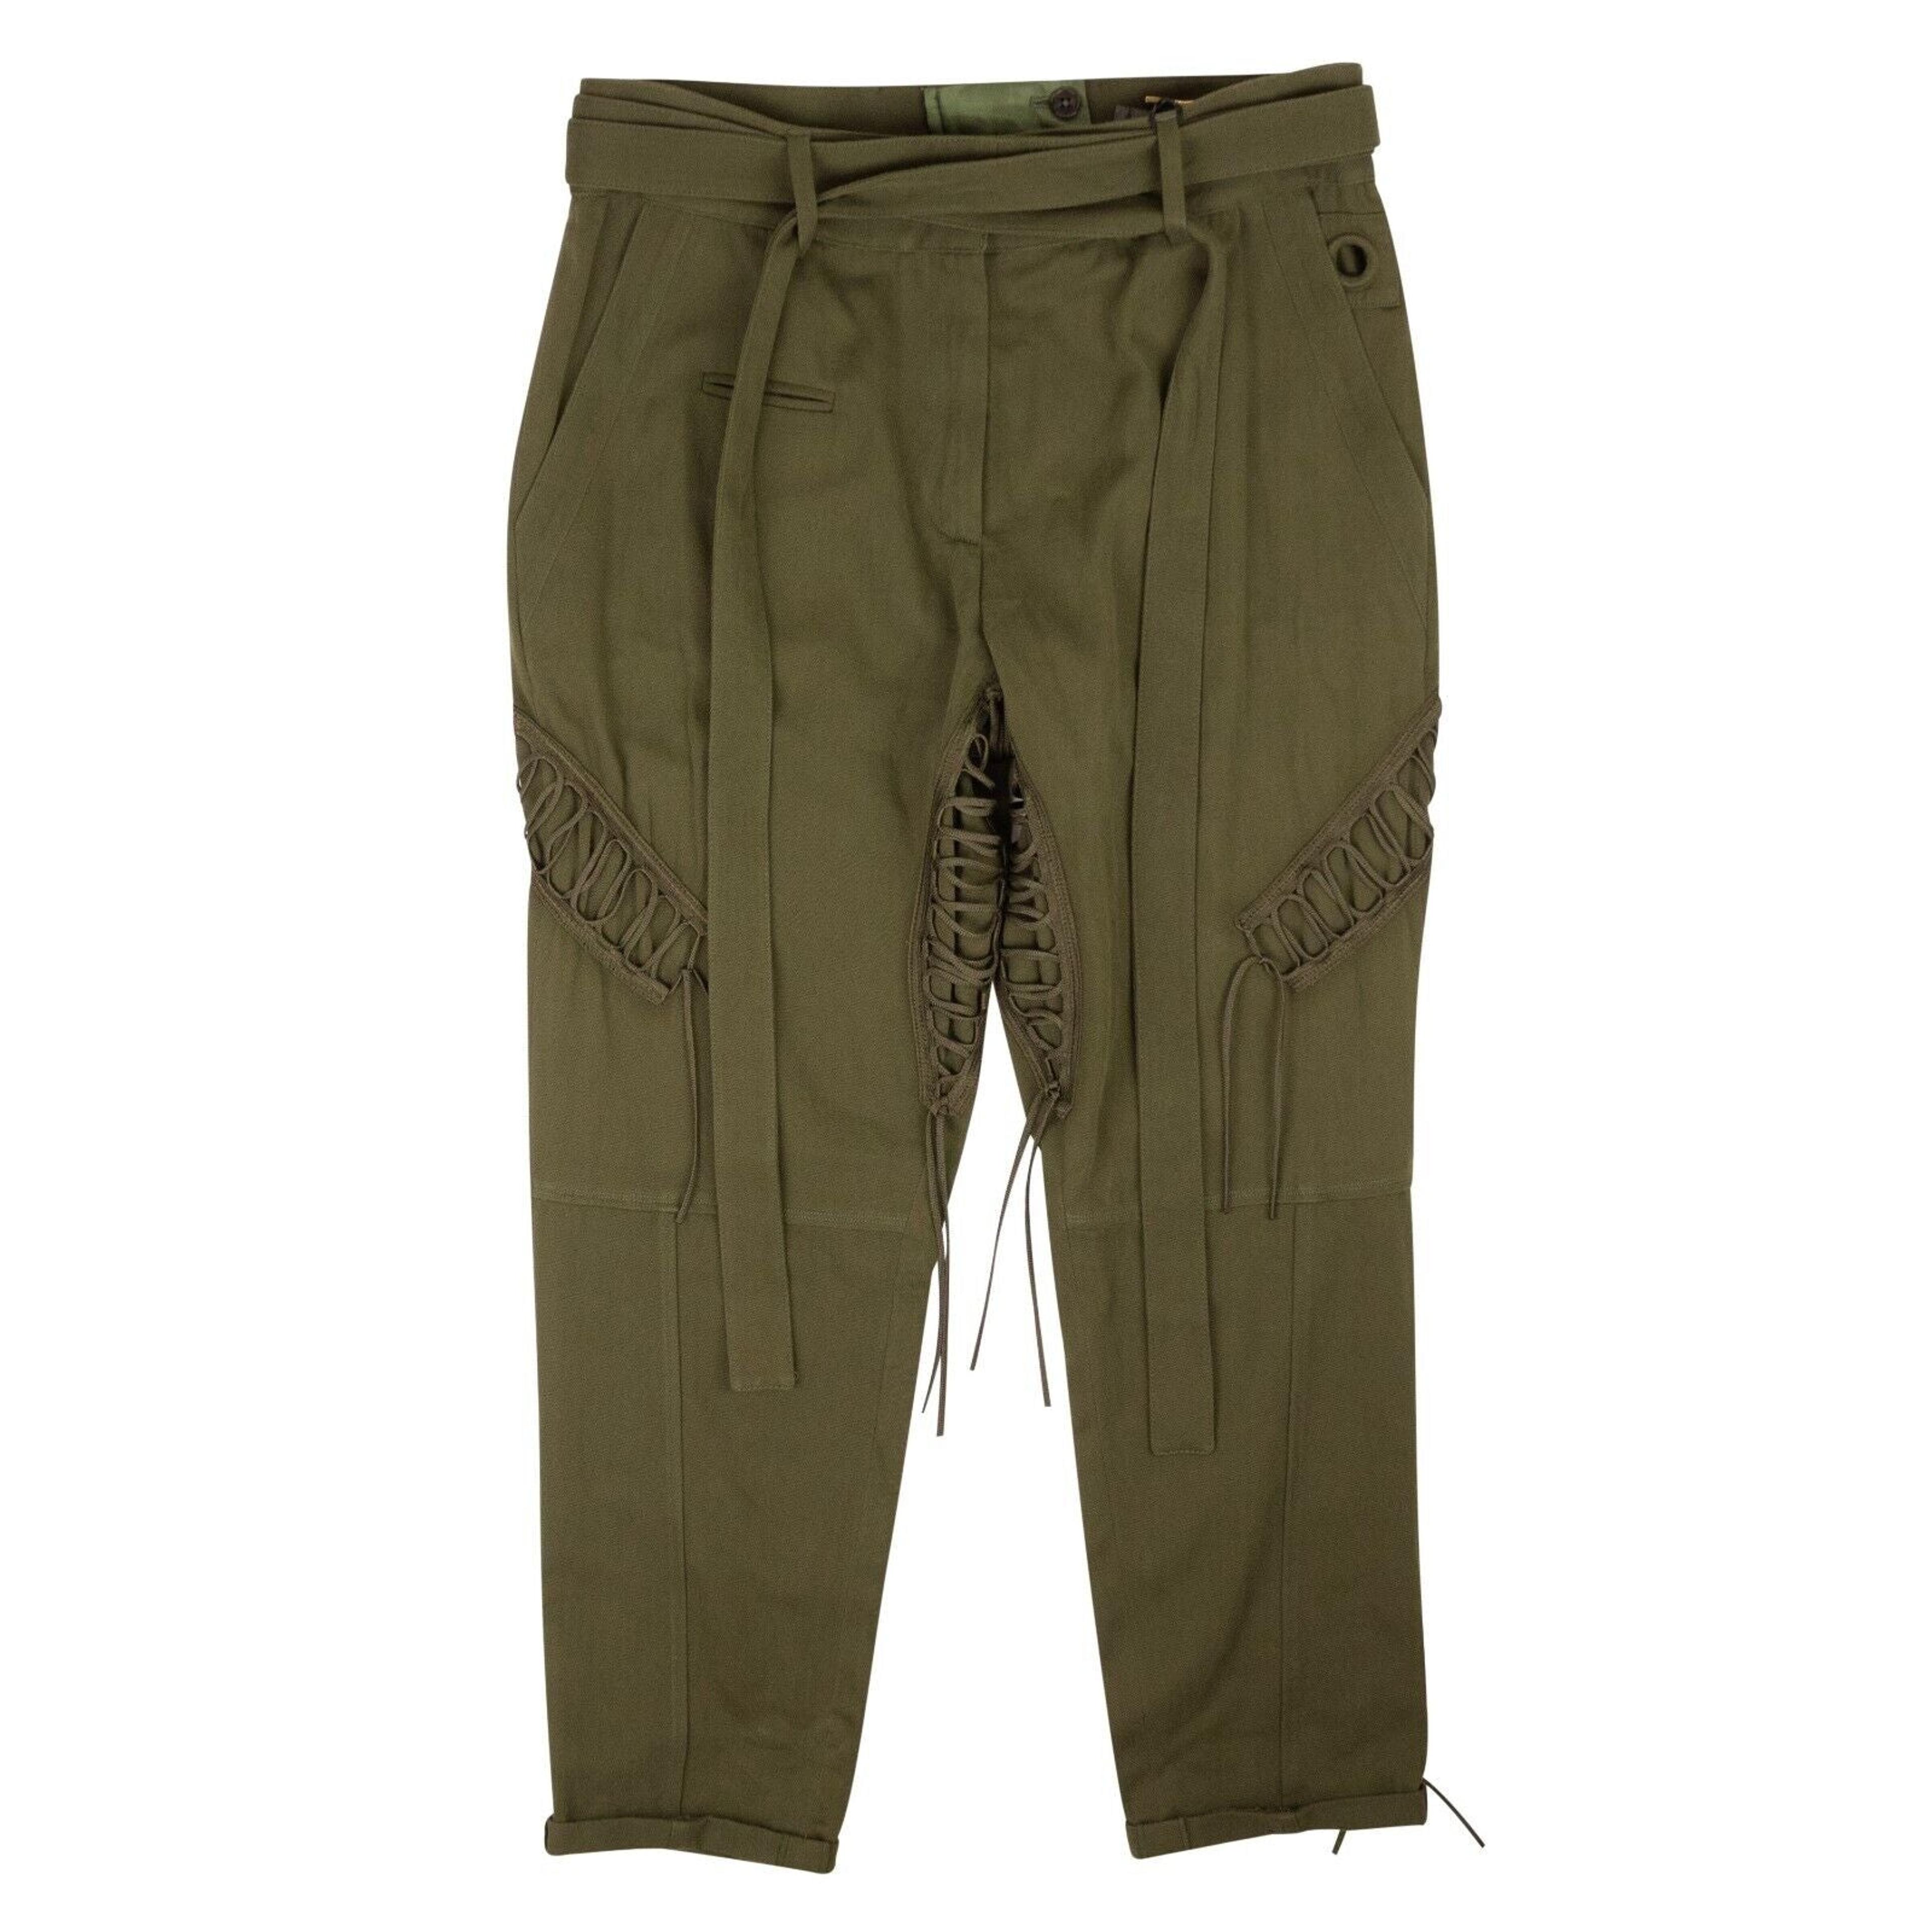 Alternate View 1 of Women's Green Lace-Up Military Pants